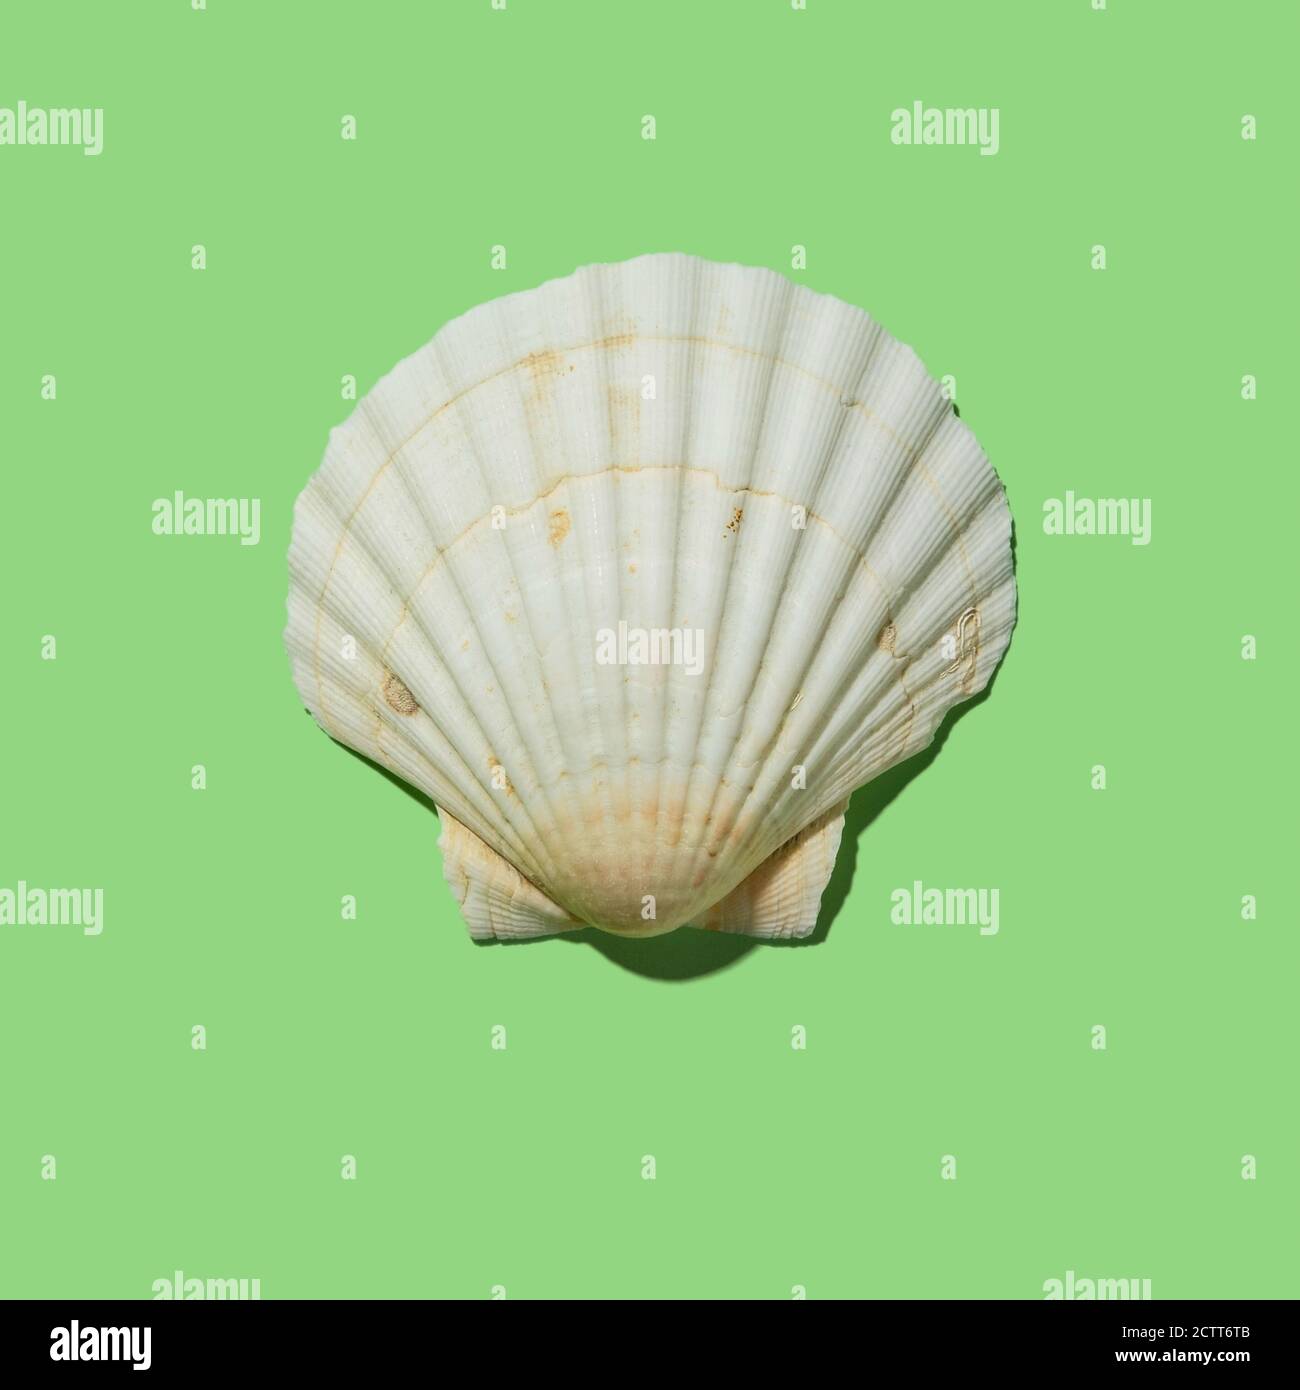 Scallop shell on green background Stock Photo